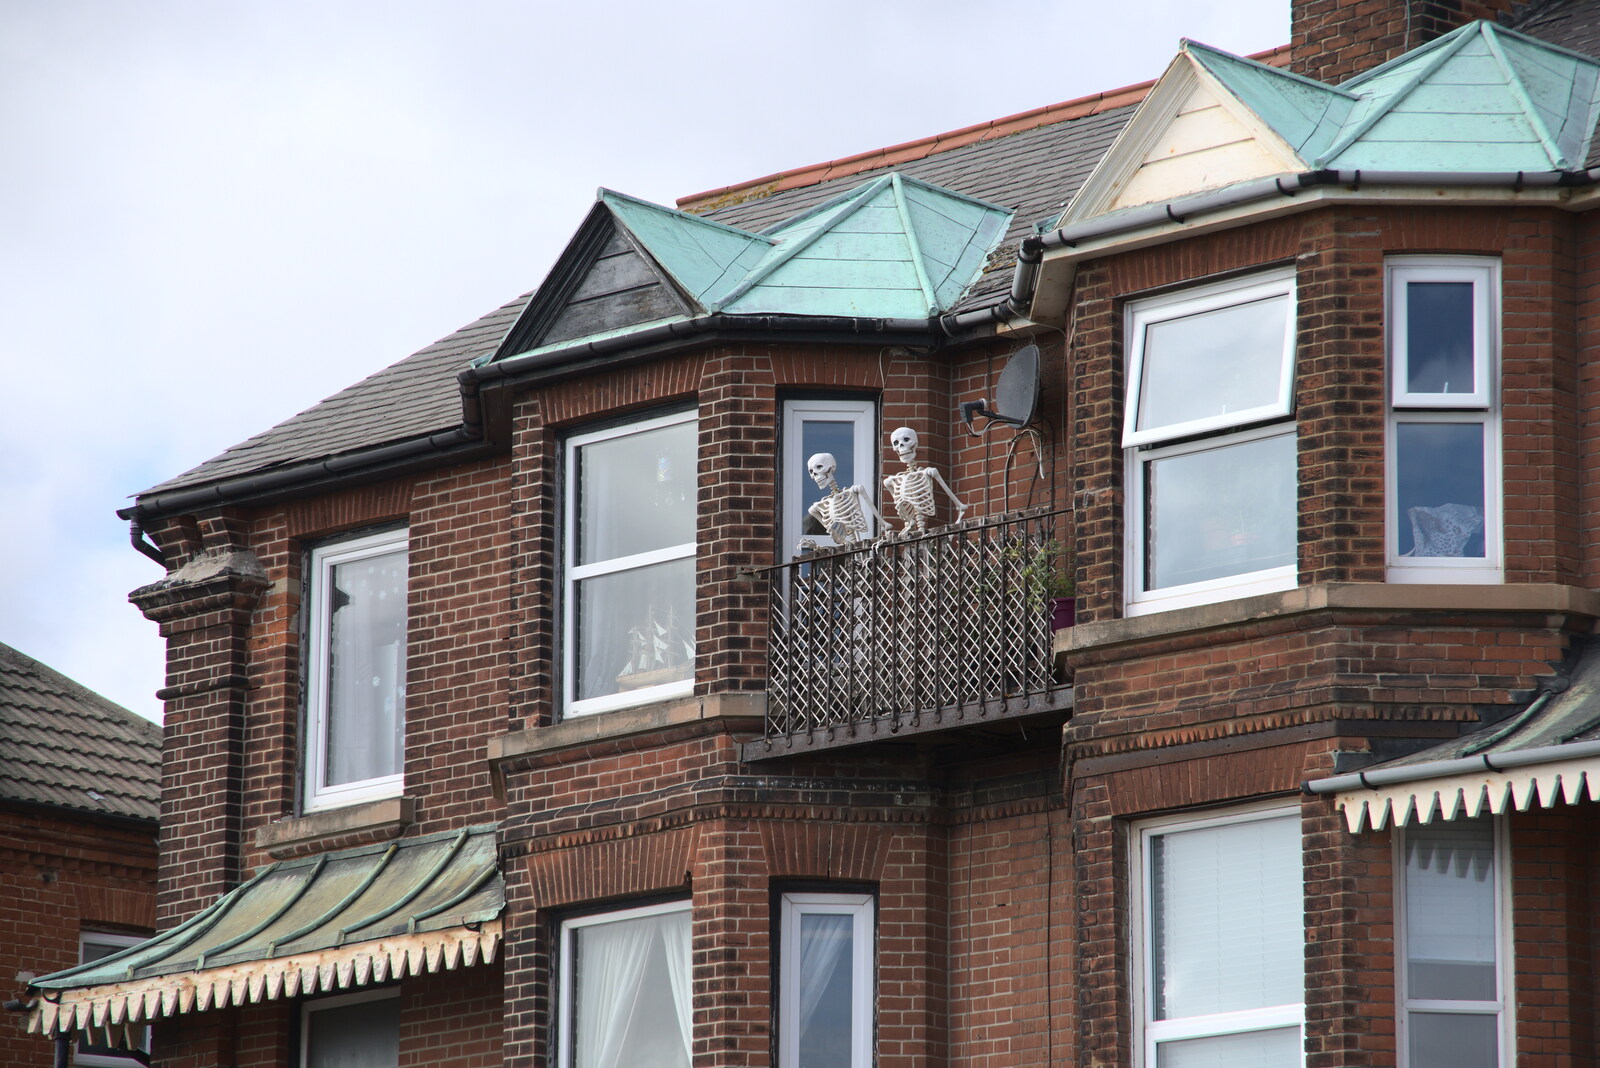 A Postcard from Felixstowe, Suffolk - 5th October 2022: A pair of skeletons look out from a balcony